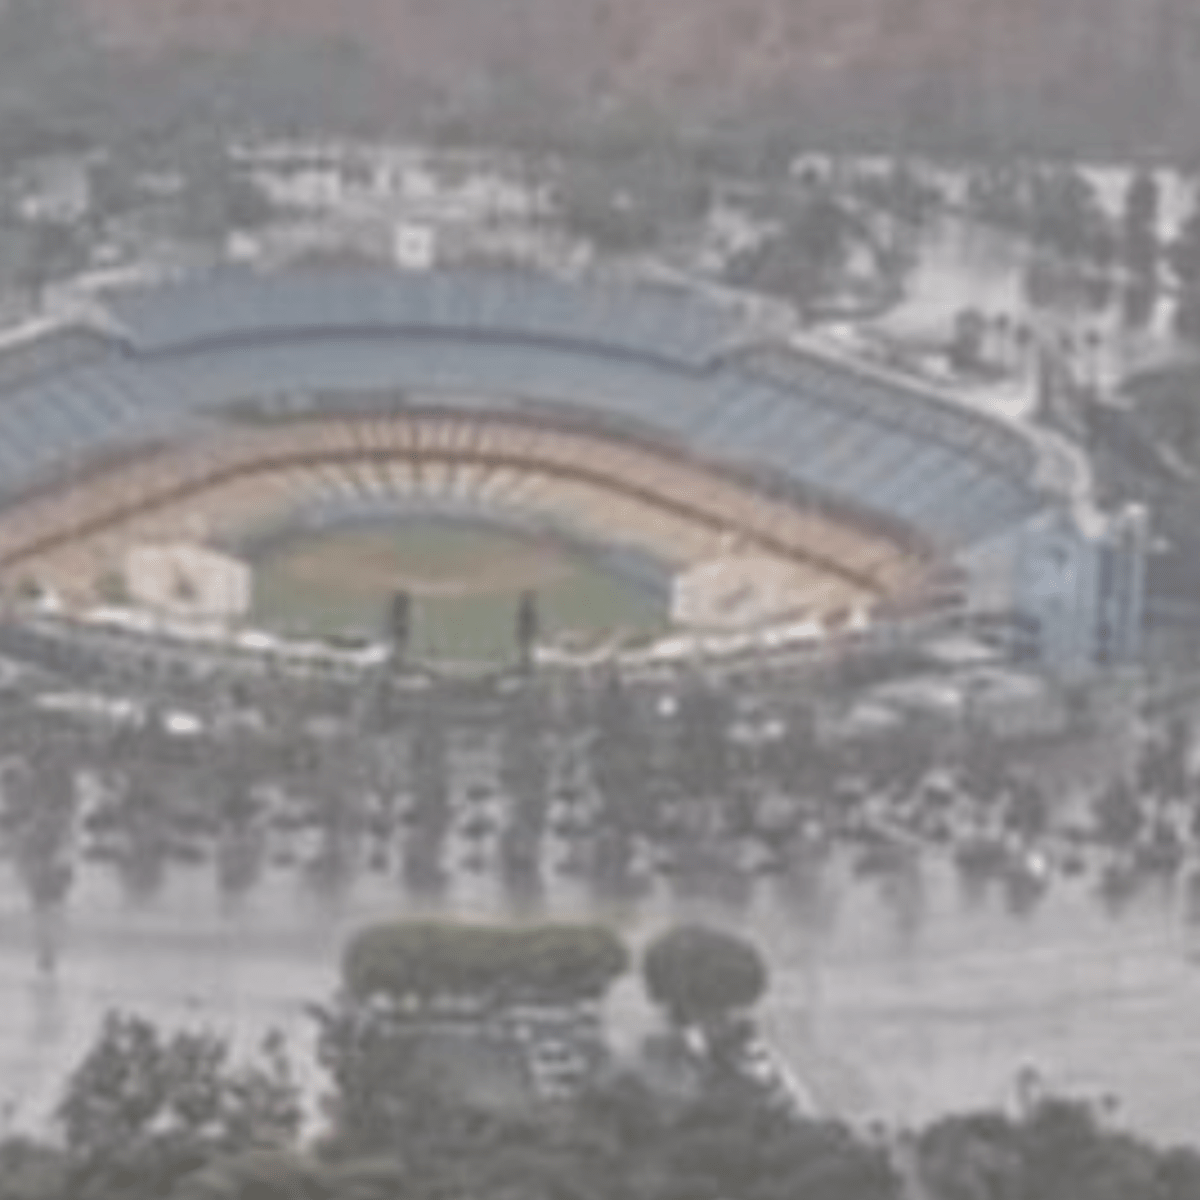 No, Dodger Stadium didn't flood. That's just a reflection - Los